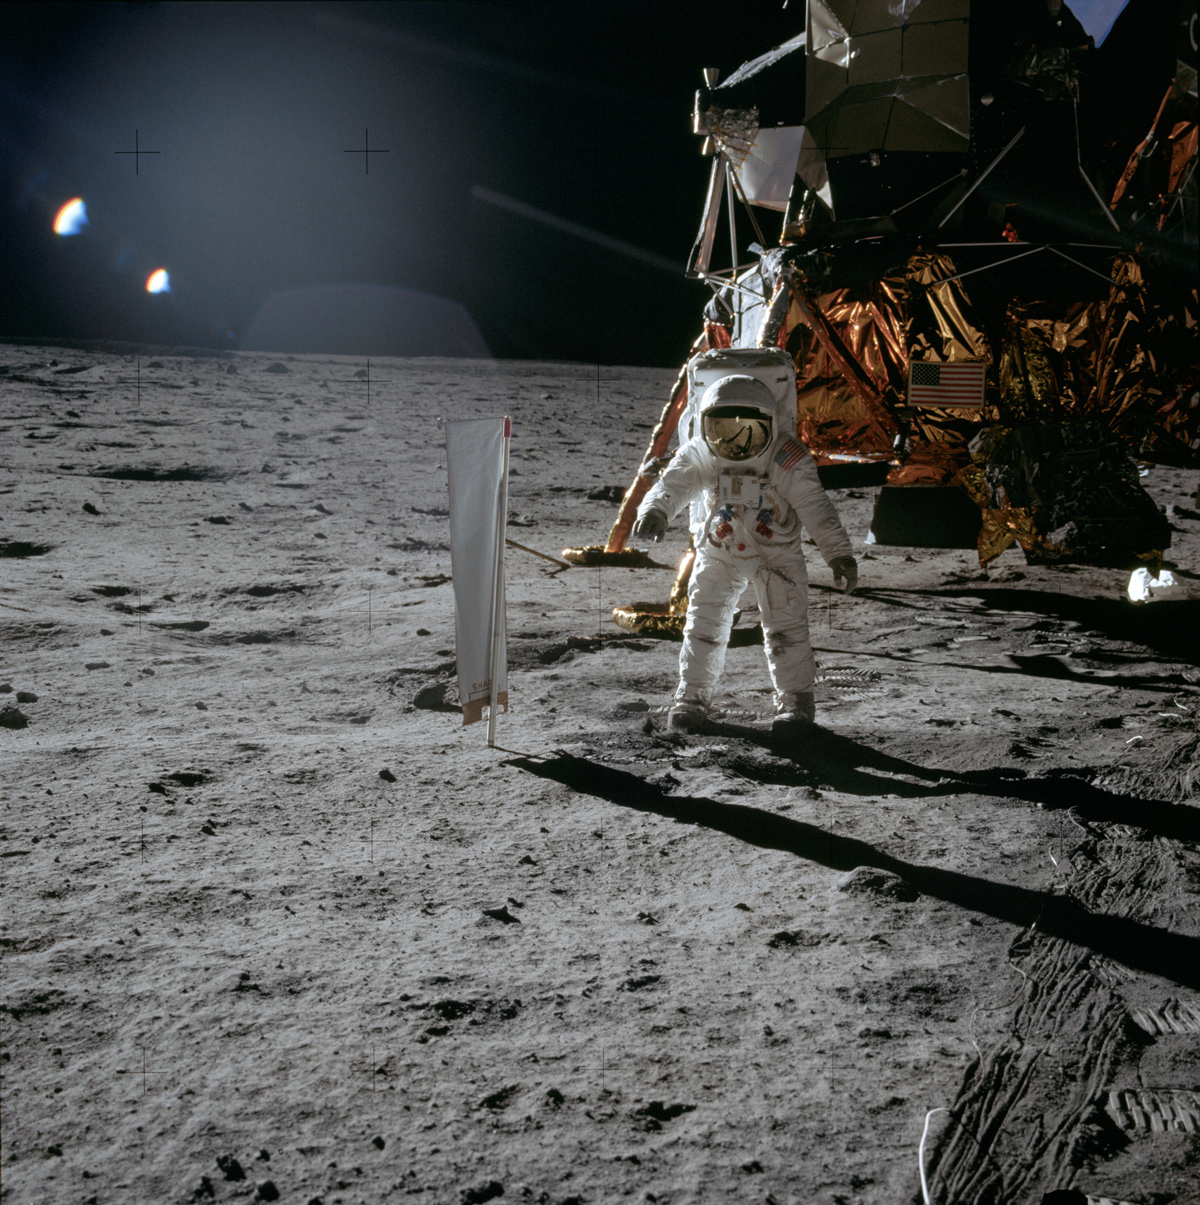 Astronaut and lunar module on surface of moon